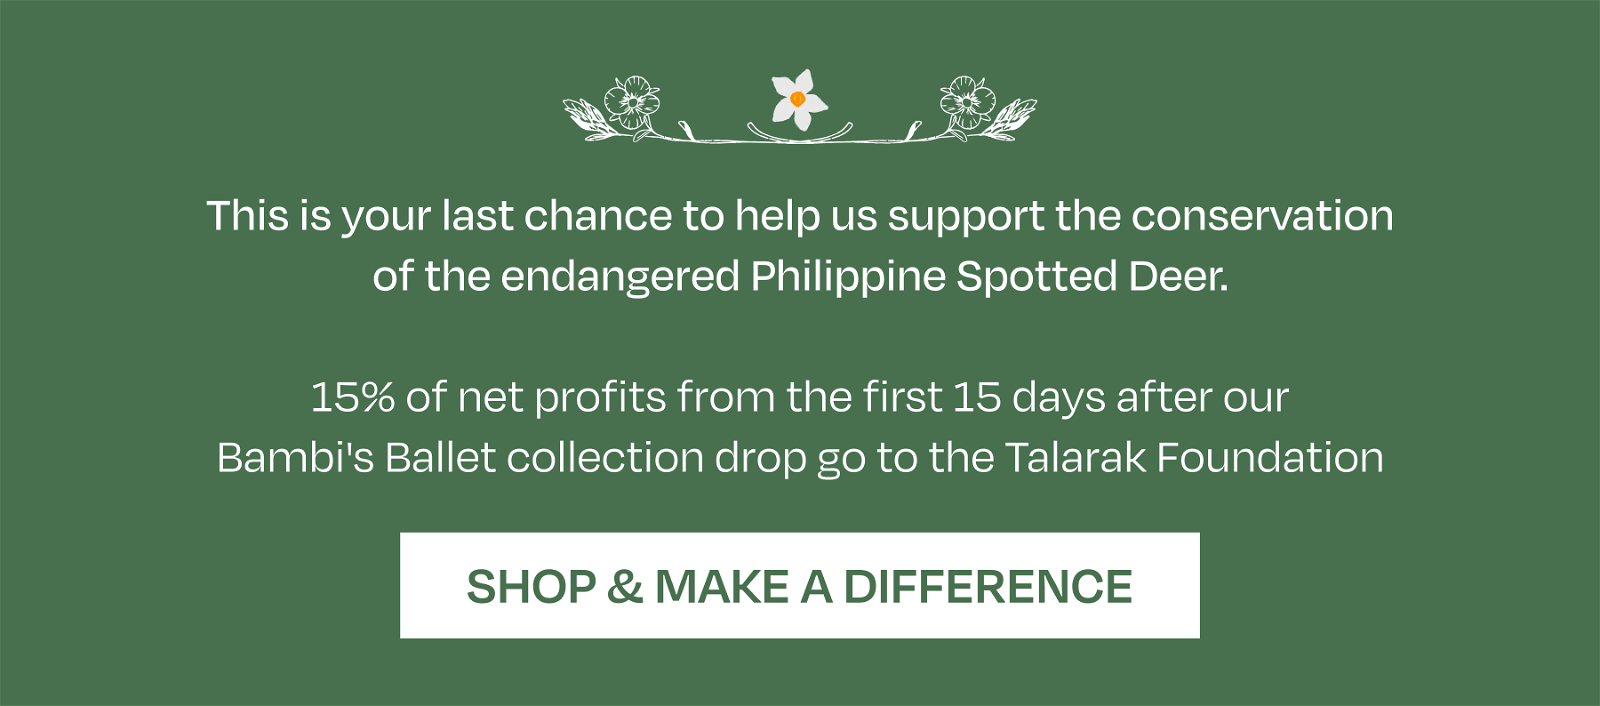 SHOP & MAKE A DIFFERENCE